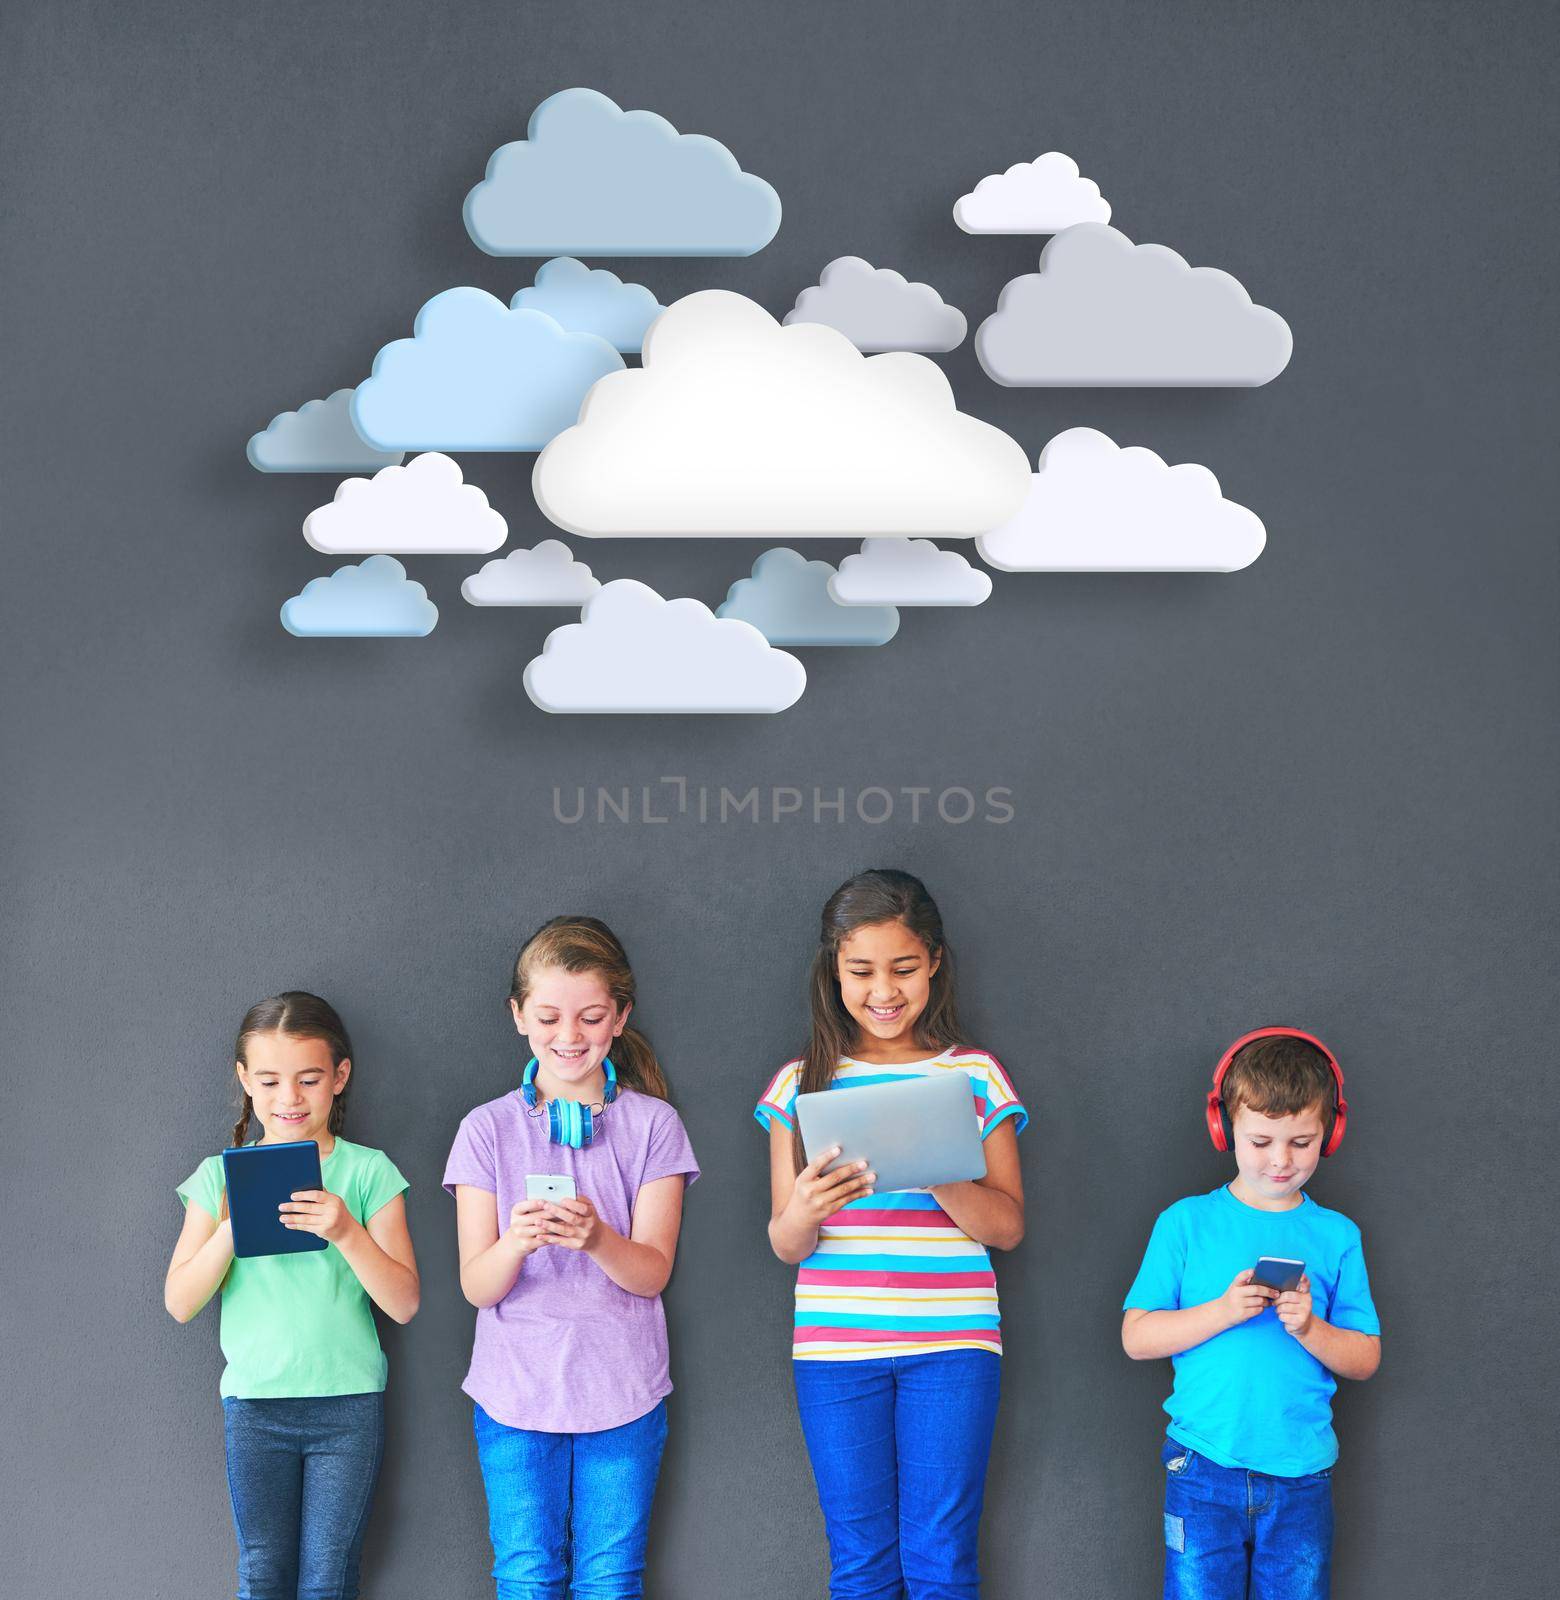 Kids keeping connected. Studio shot of kids using wireless technology with clouds above them against a gray background. by YuriArcurs